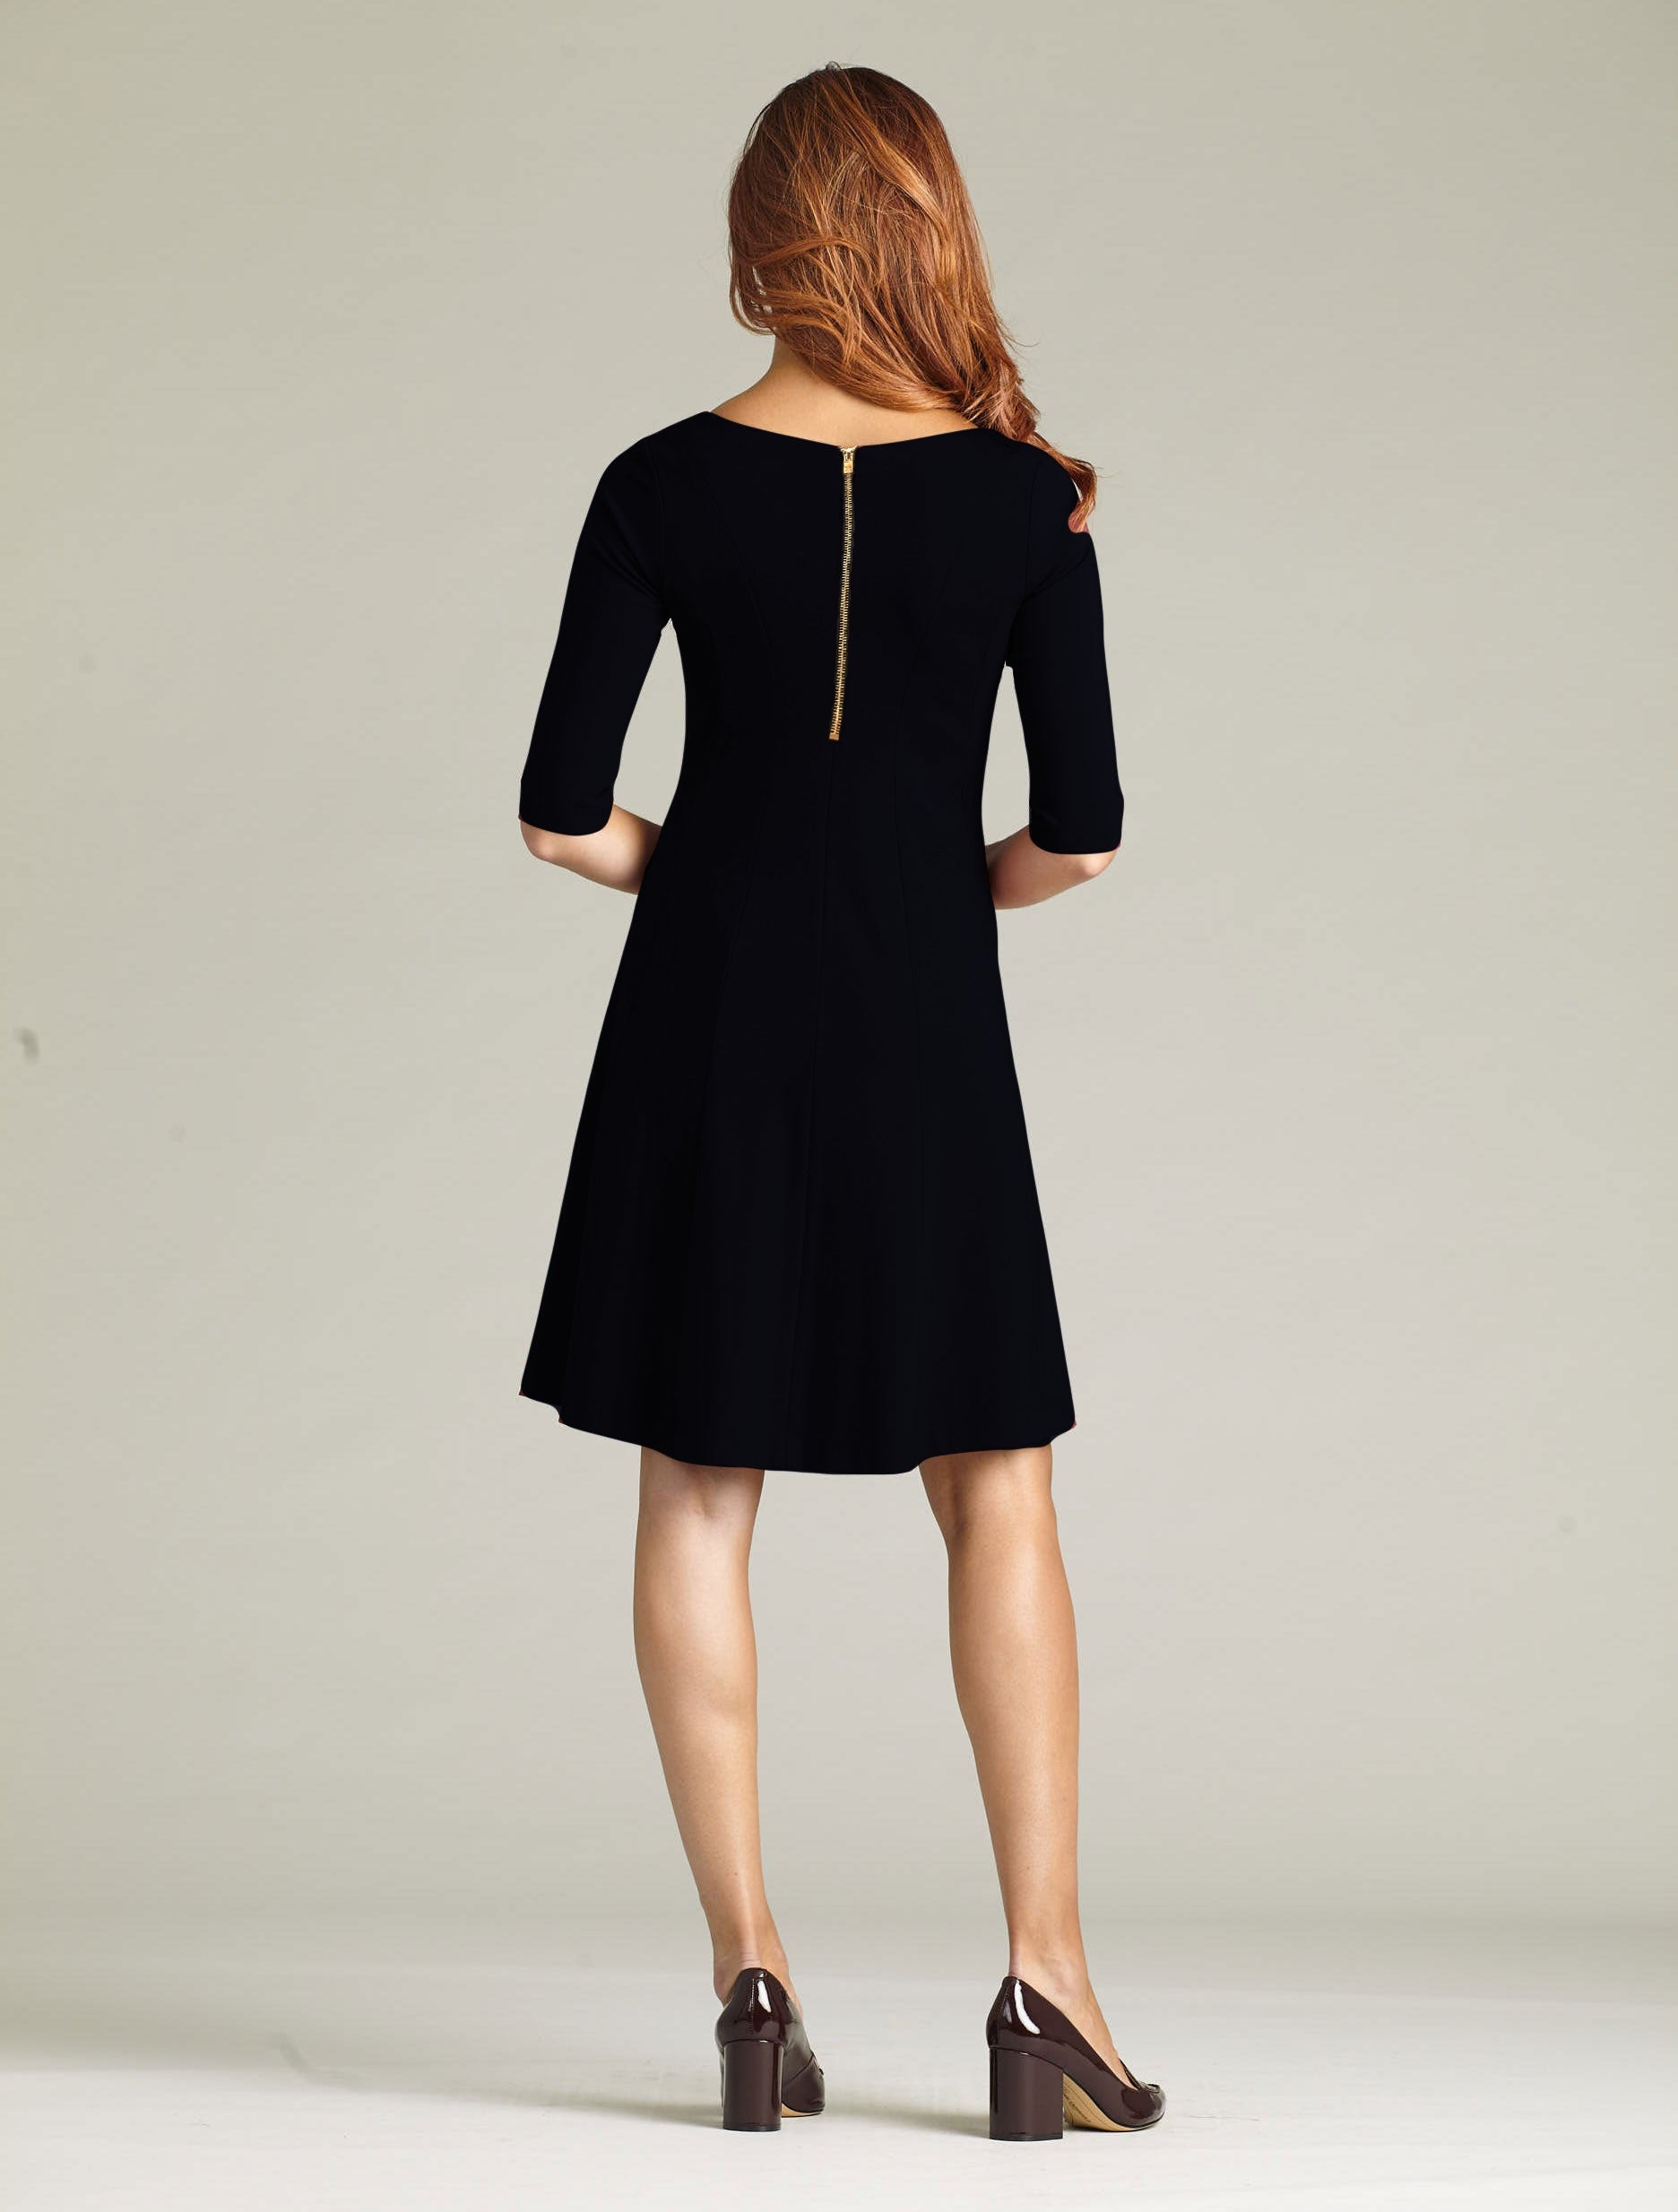 Women' Business Lizette Dress - Black NORA GARDNER | OFFICIAL STORE for work and office